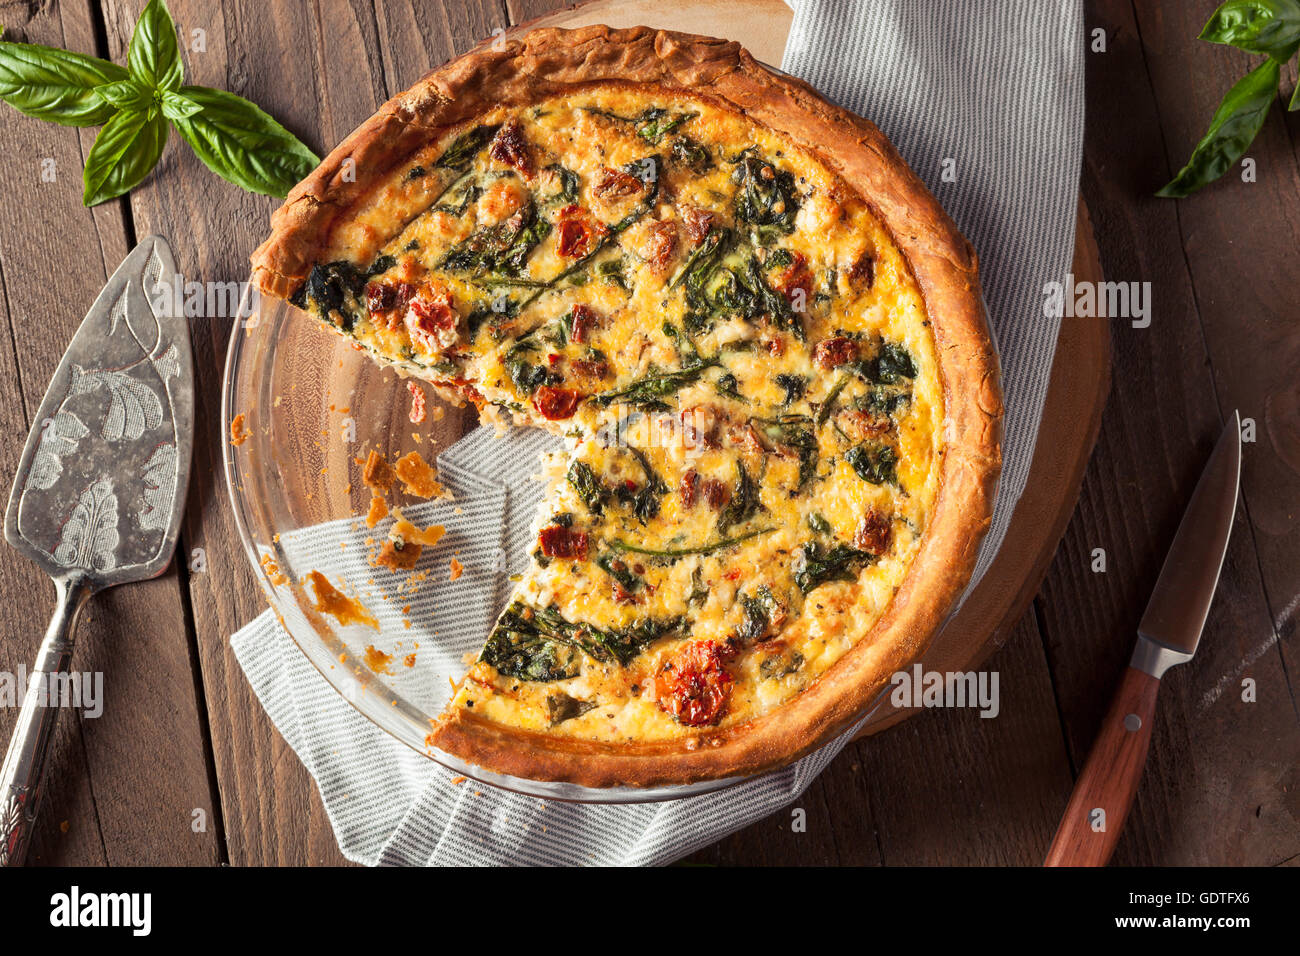 Homemade Cheesy Egg Quiche for Brunch with Spinach and Tomato Stock Photo